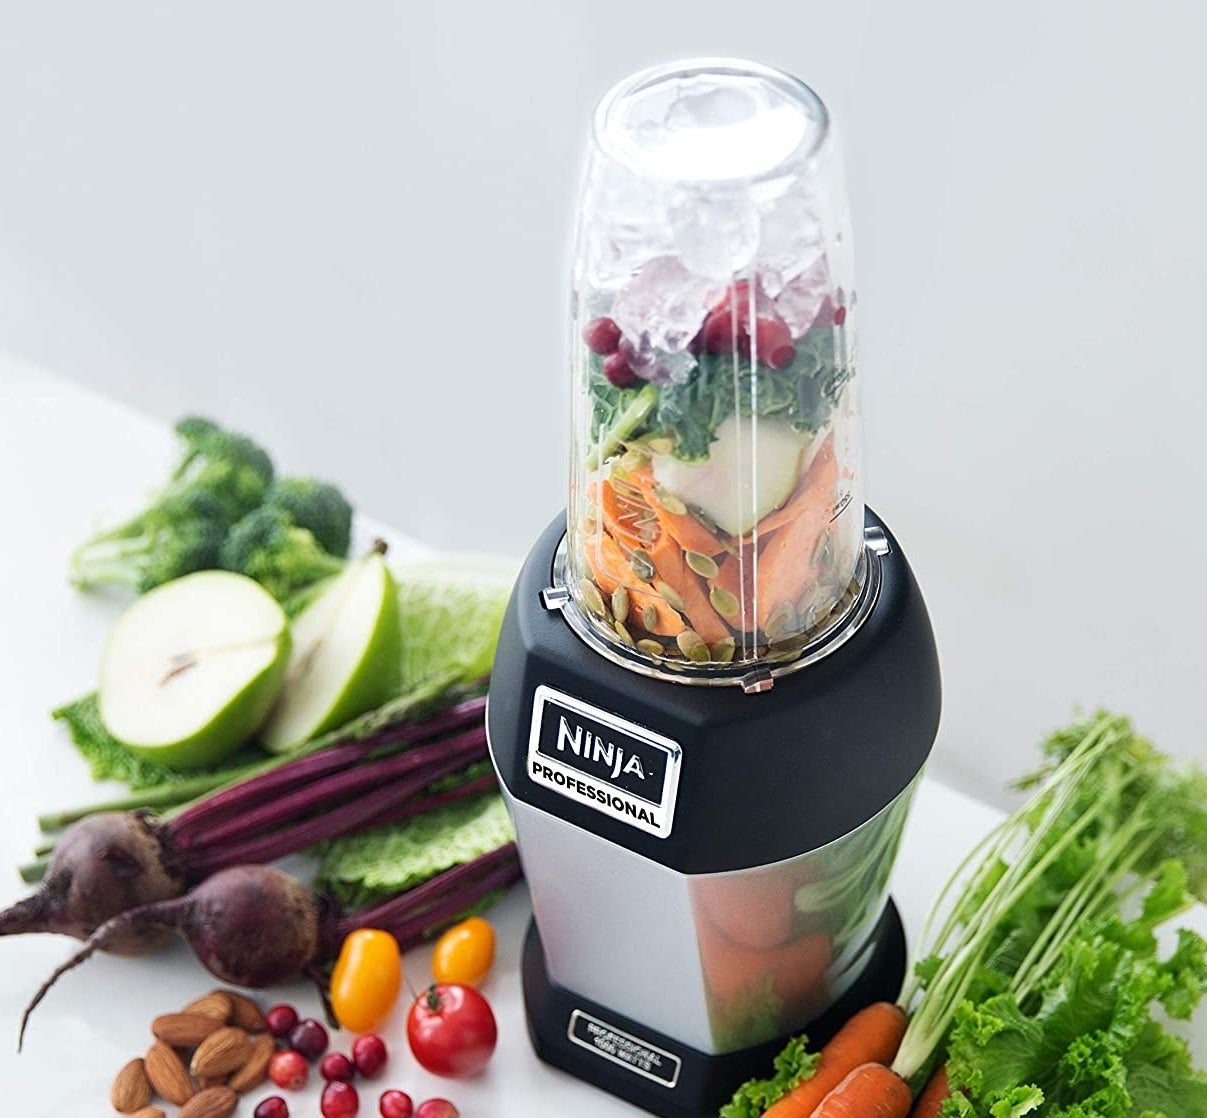 A Ninja blender filled with fruits and veggies